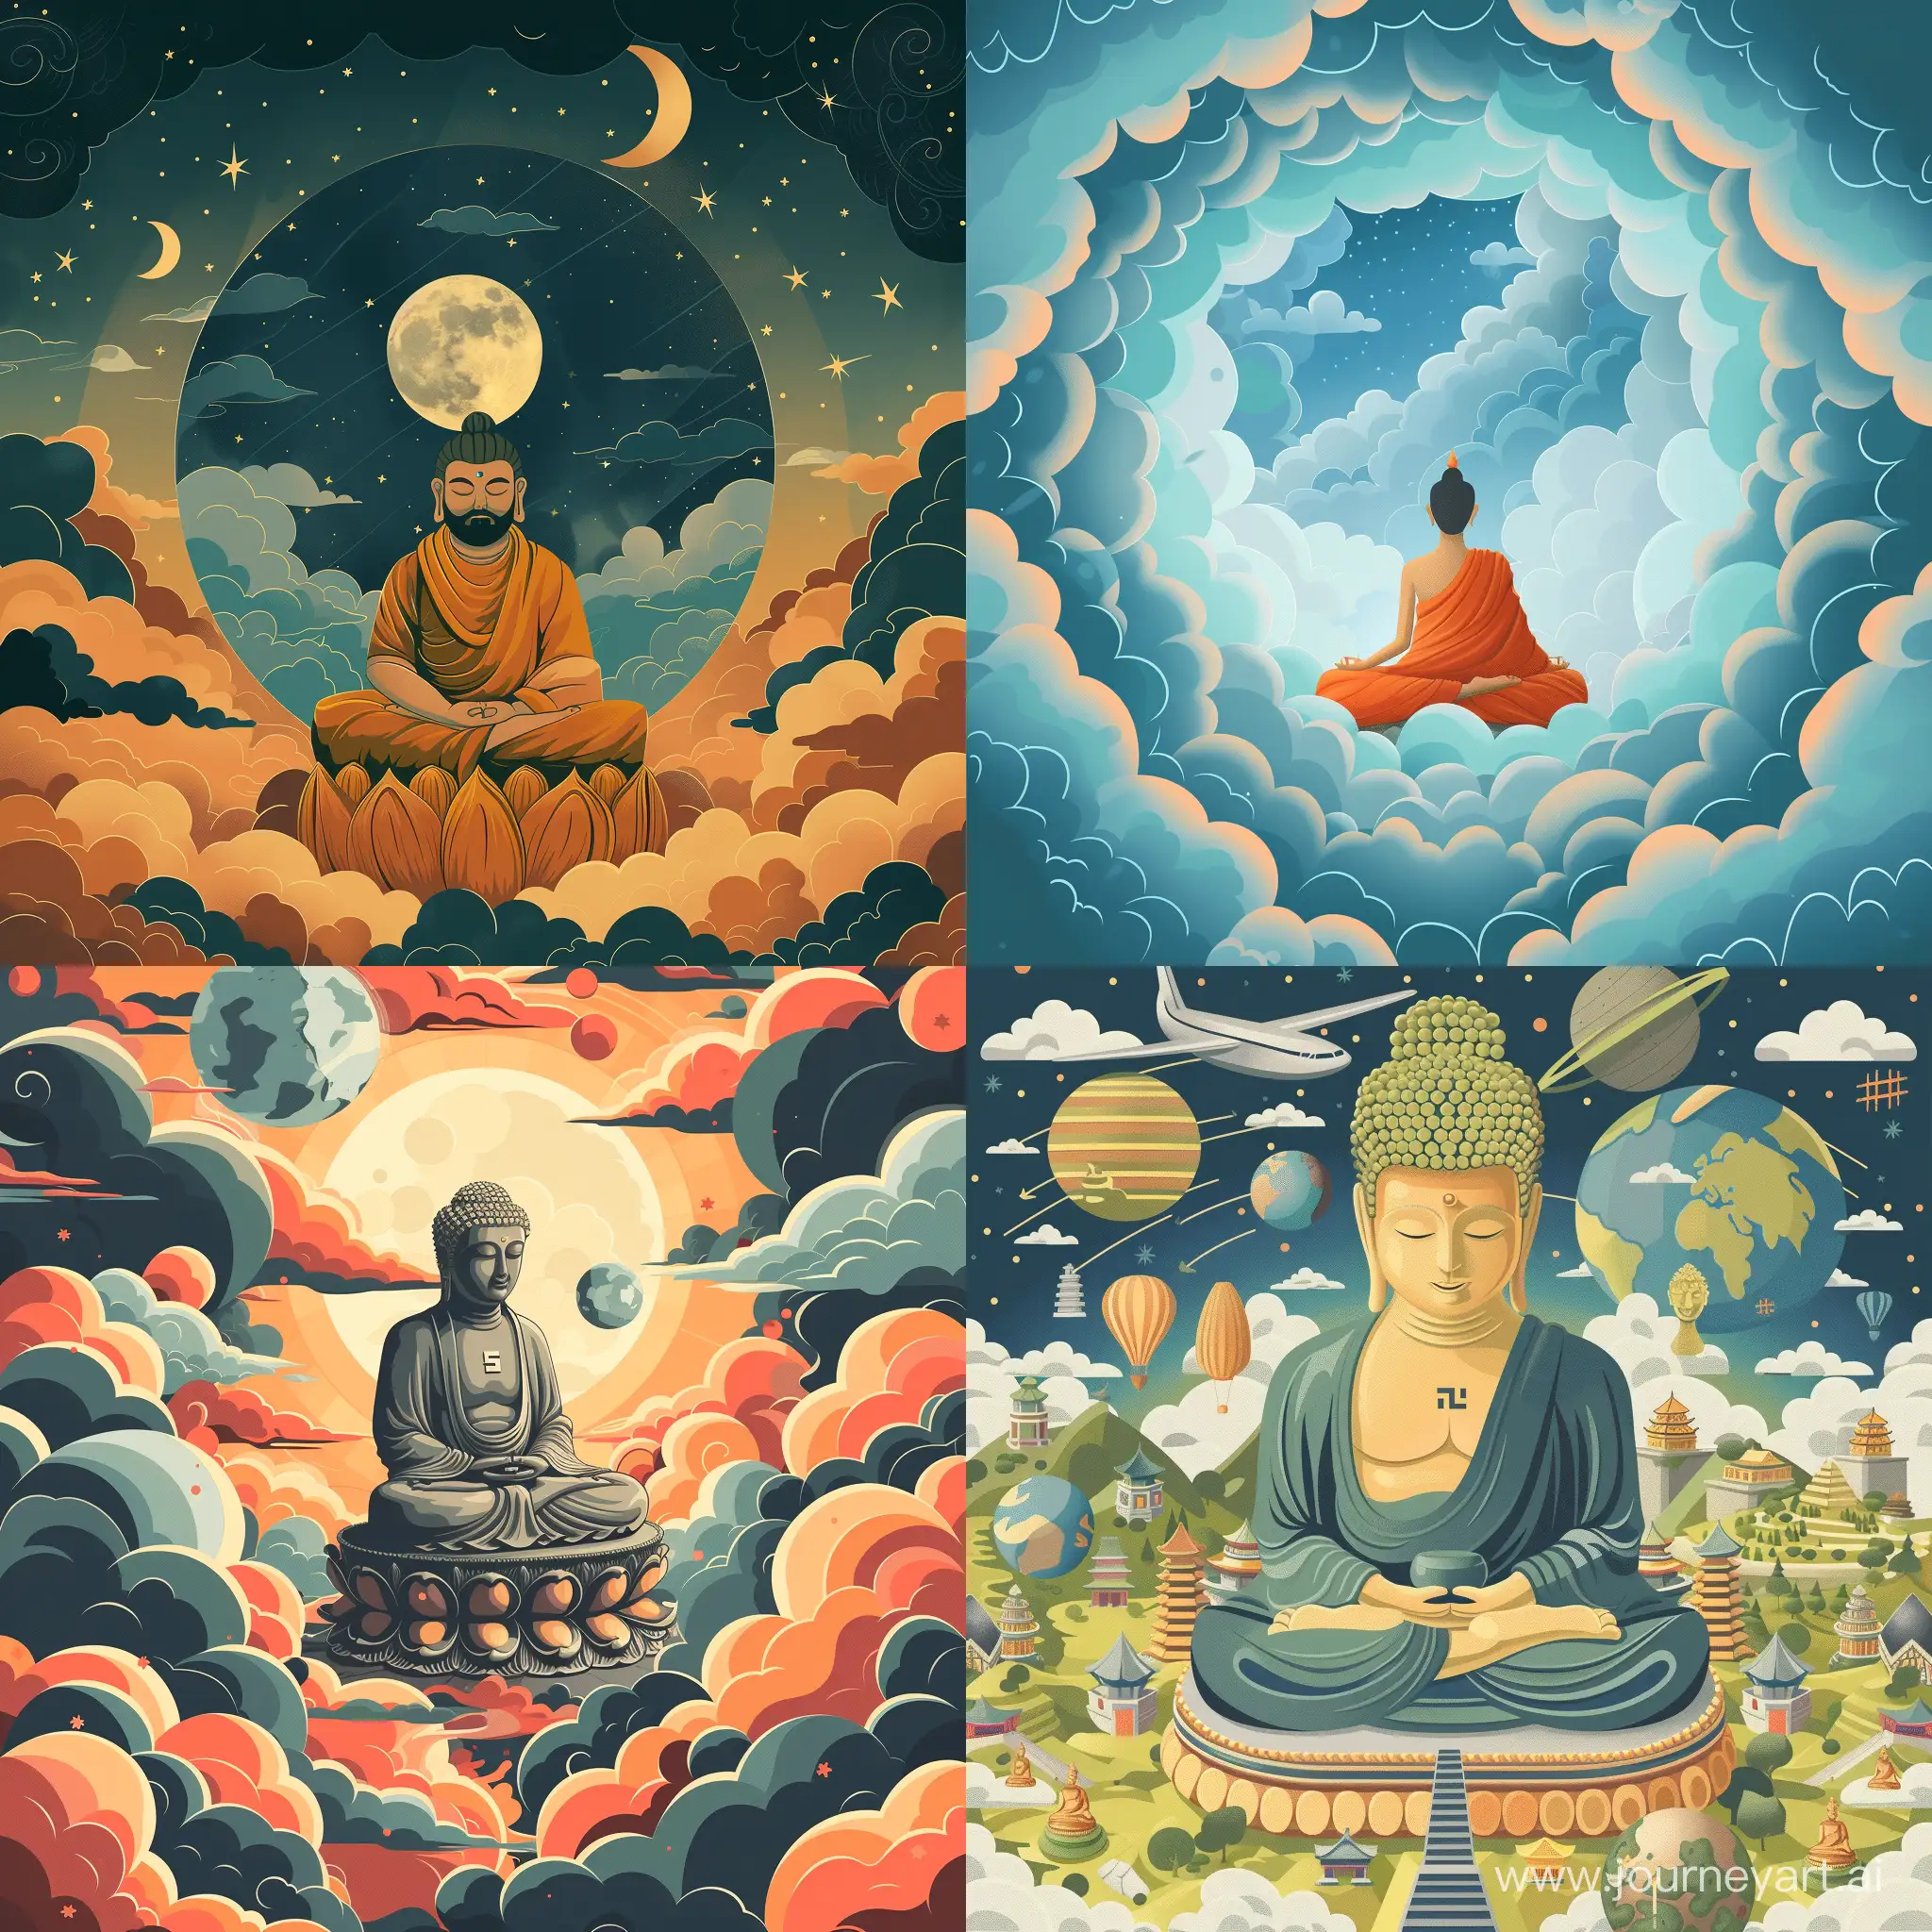 Buddha sitting in the middel, Phone wallpaper, By Daniel Eskridge, In the beginning God created the heavens and the earth, very detailed, in cartoon flat style